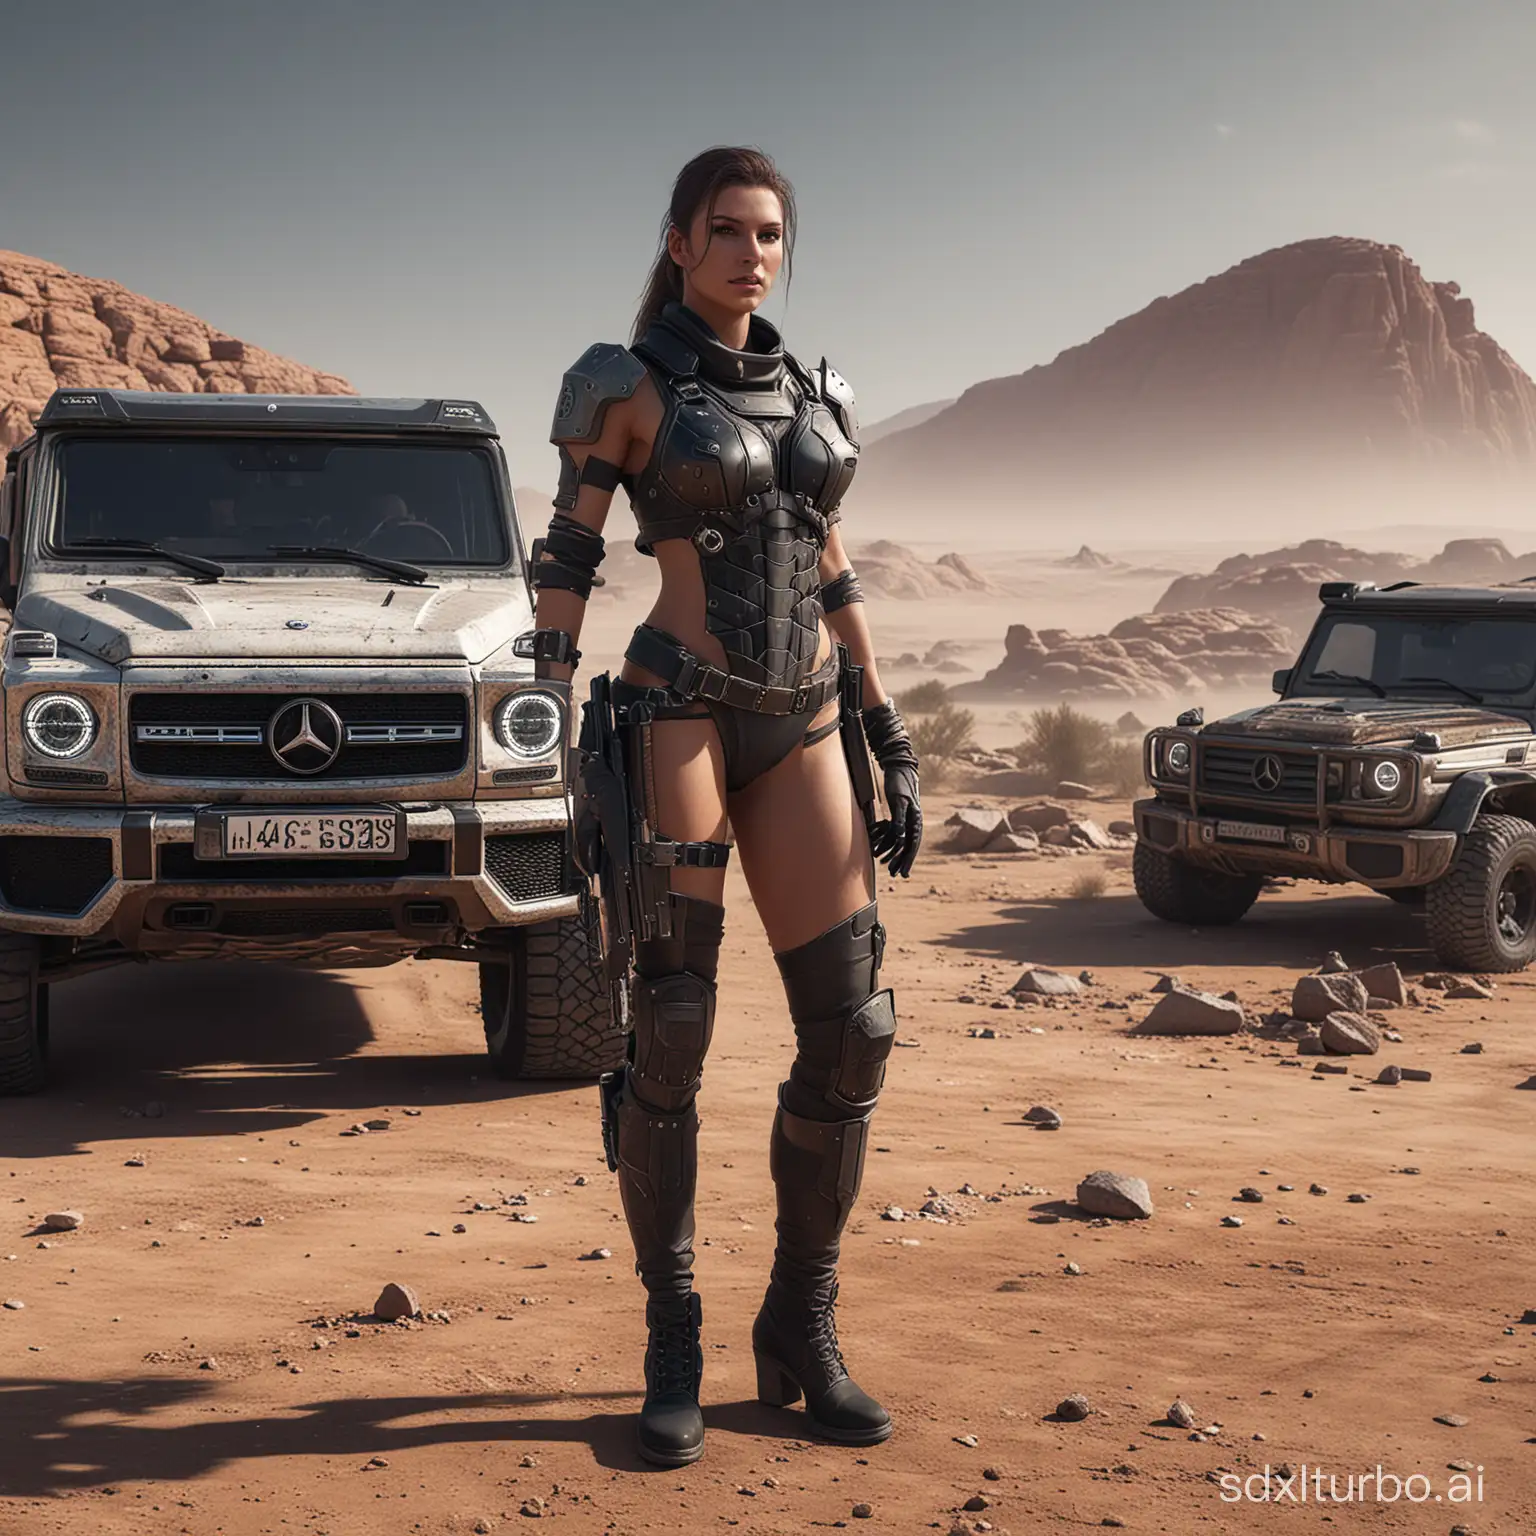 Wasteland-Style-Female-Warrior-Poses-with-Black-Mercedes-Benz-G63-2023-TechInfused-Mysterious-Femme-Fatale